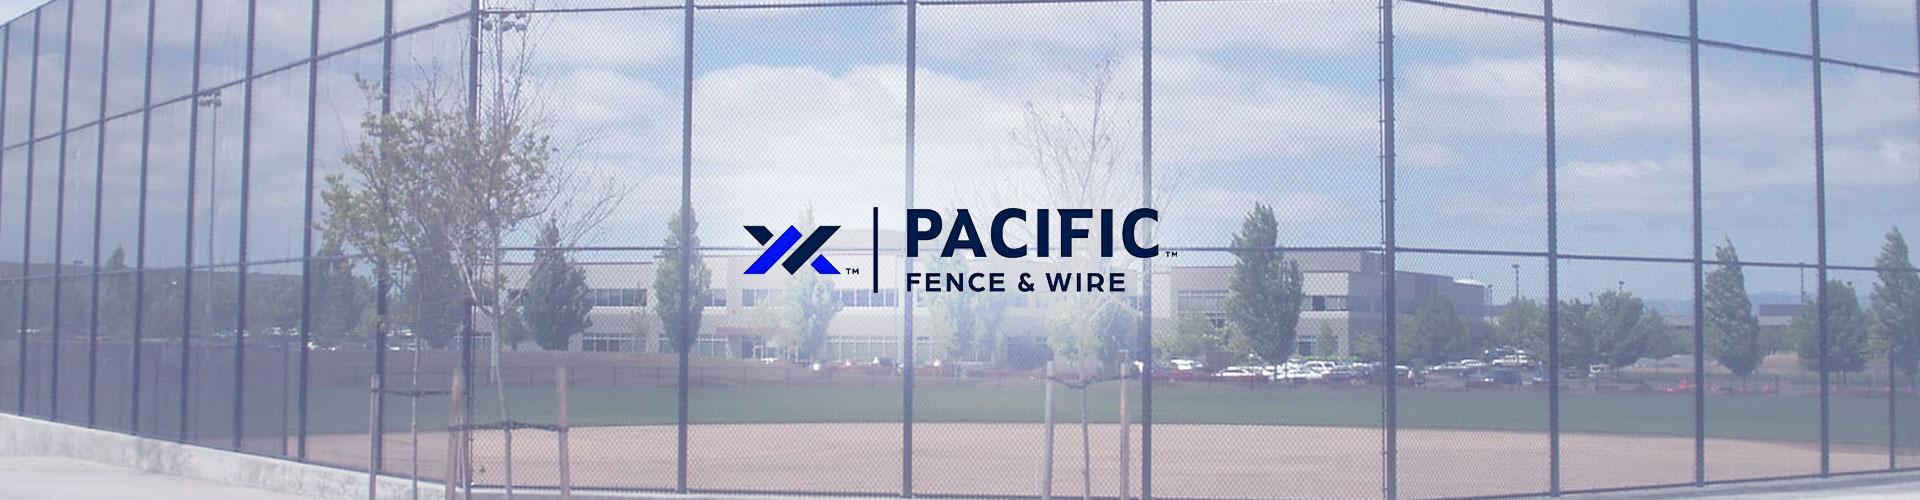 Pacific Fence & Wire banner